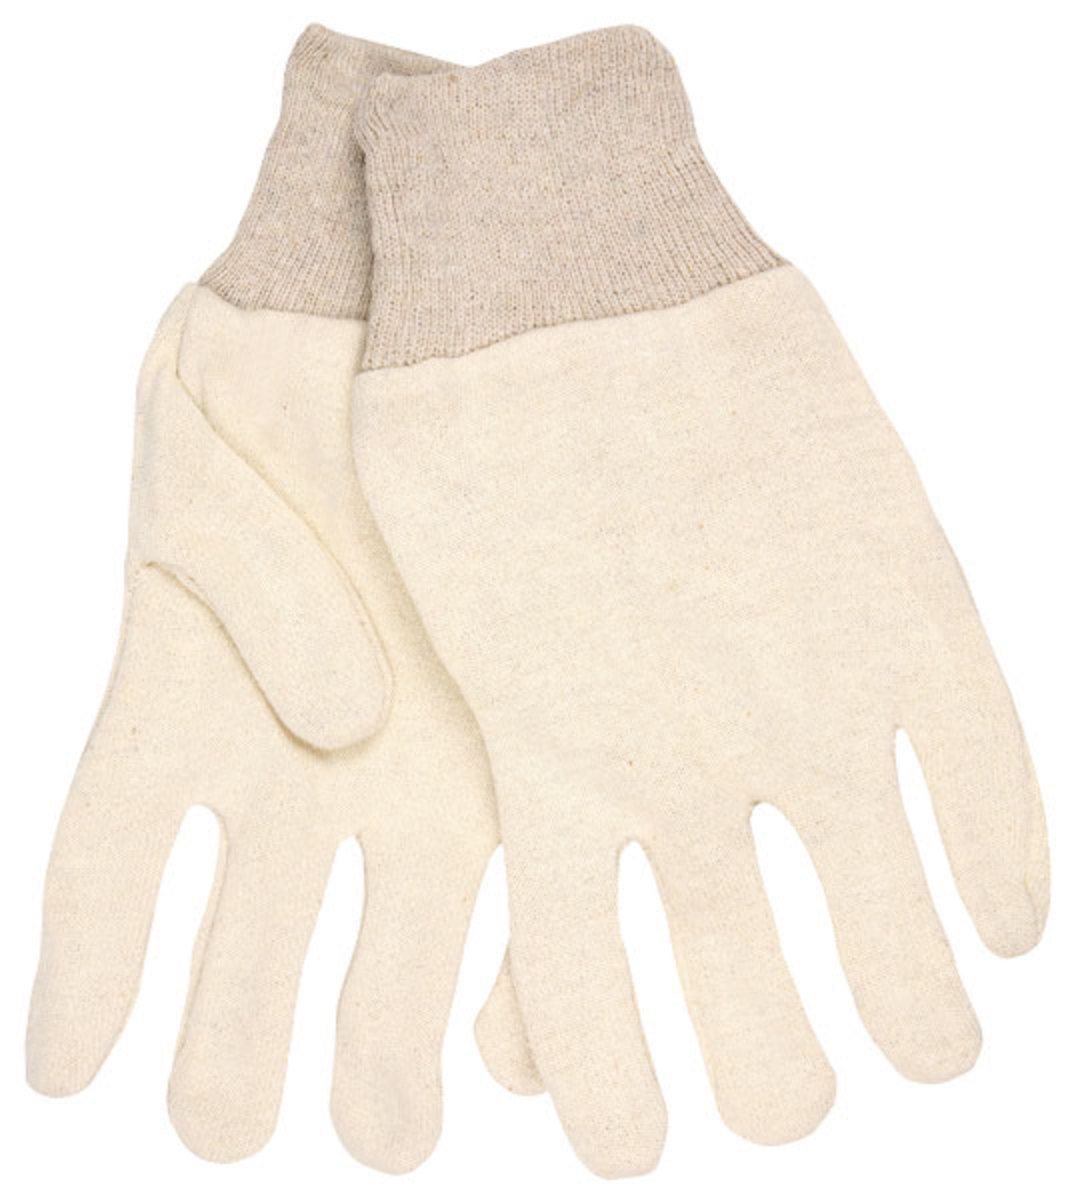 Memphis Glove Large Natural 7 Ounce Cotton Jersey Reversible Work Gloves With Knit Wrist